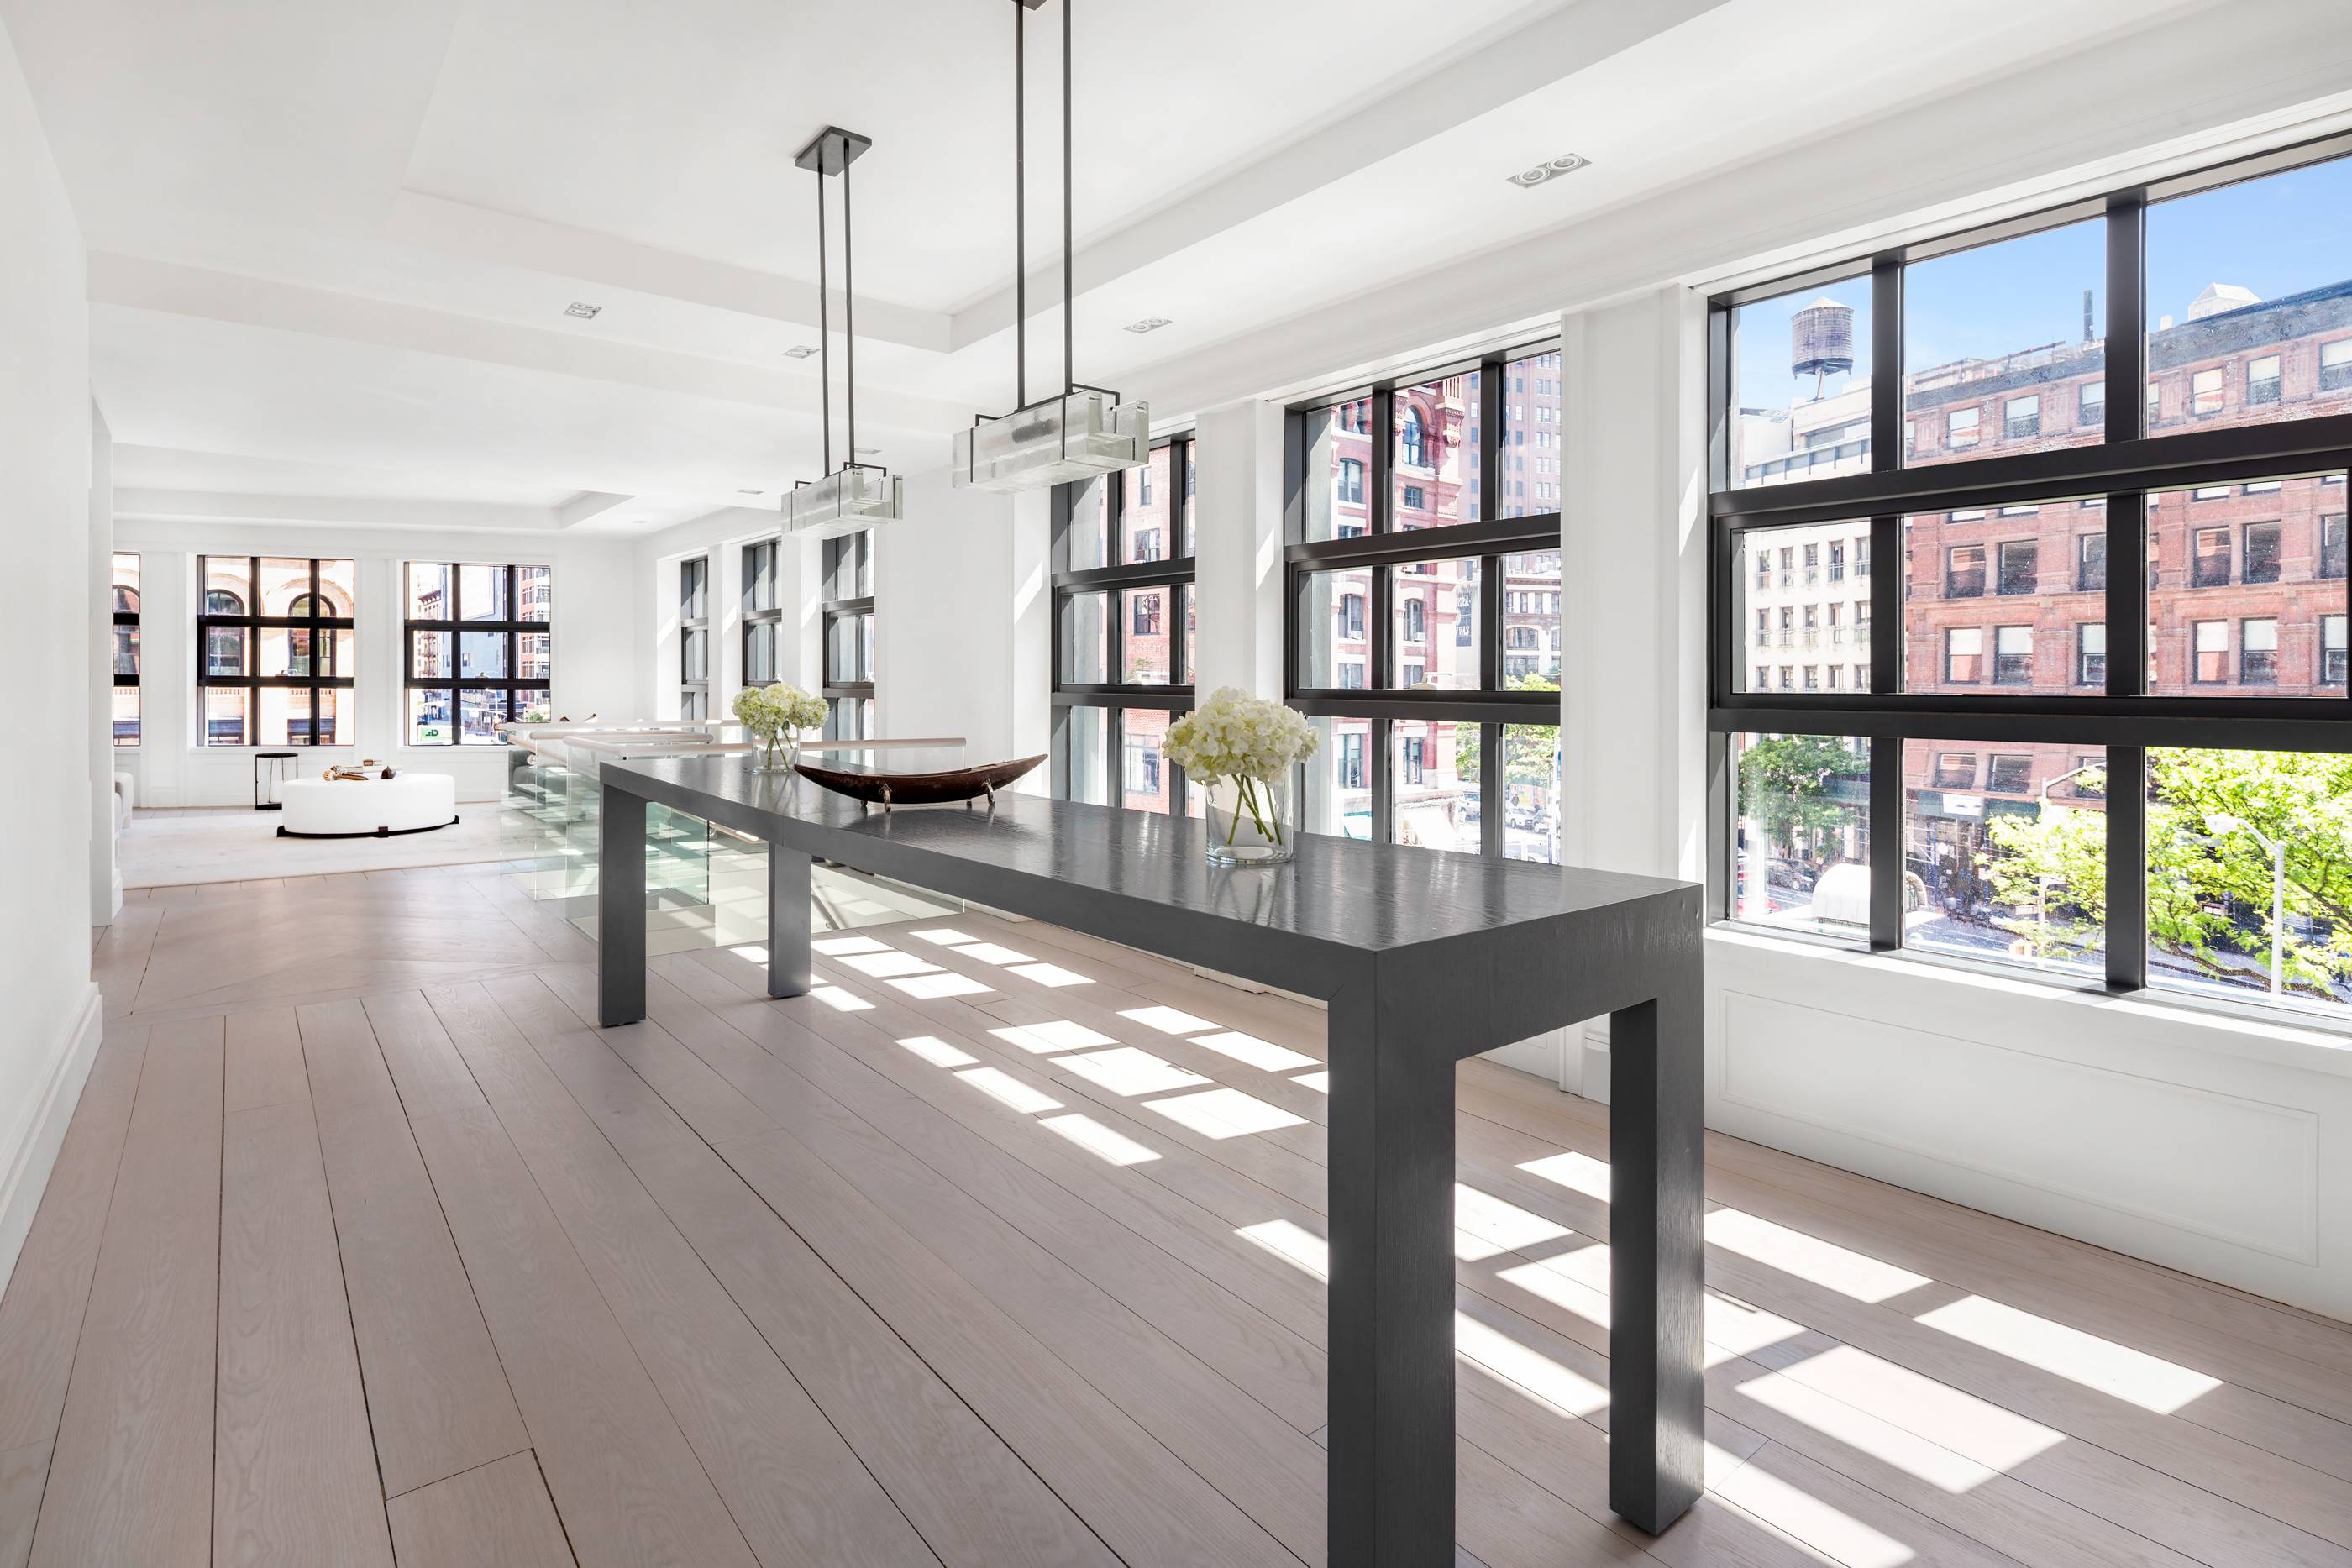 Located on a prime cobblestone street in the heart of Tribeca, this 4 bedroom 4 bathroom duplex is in mint condition.